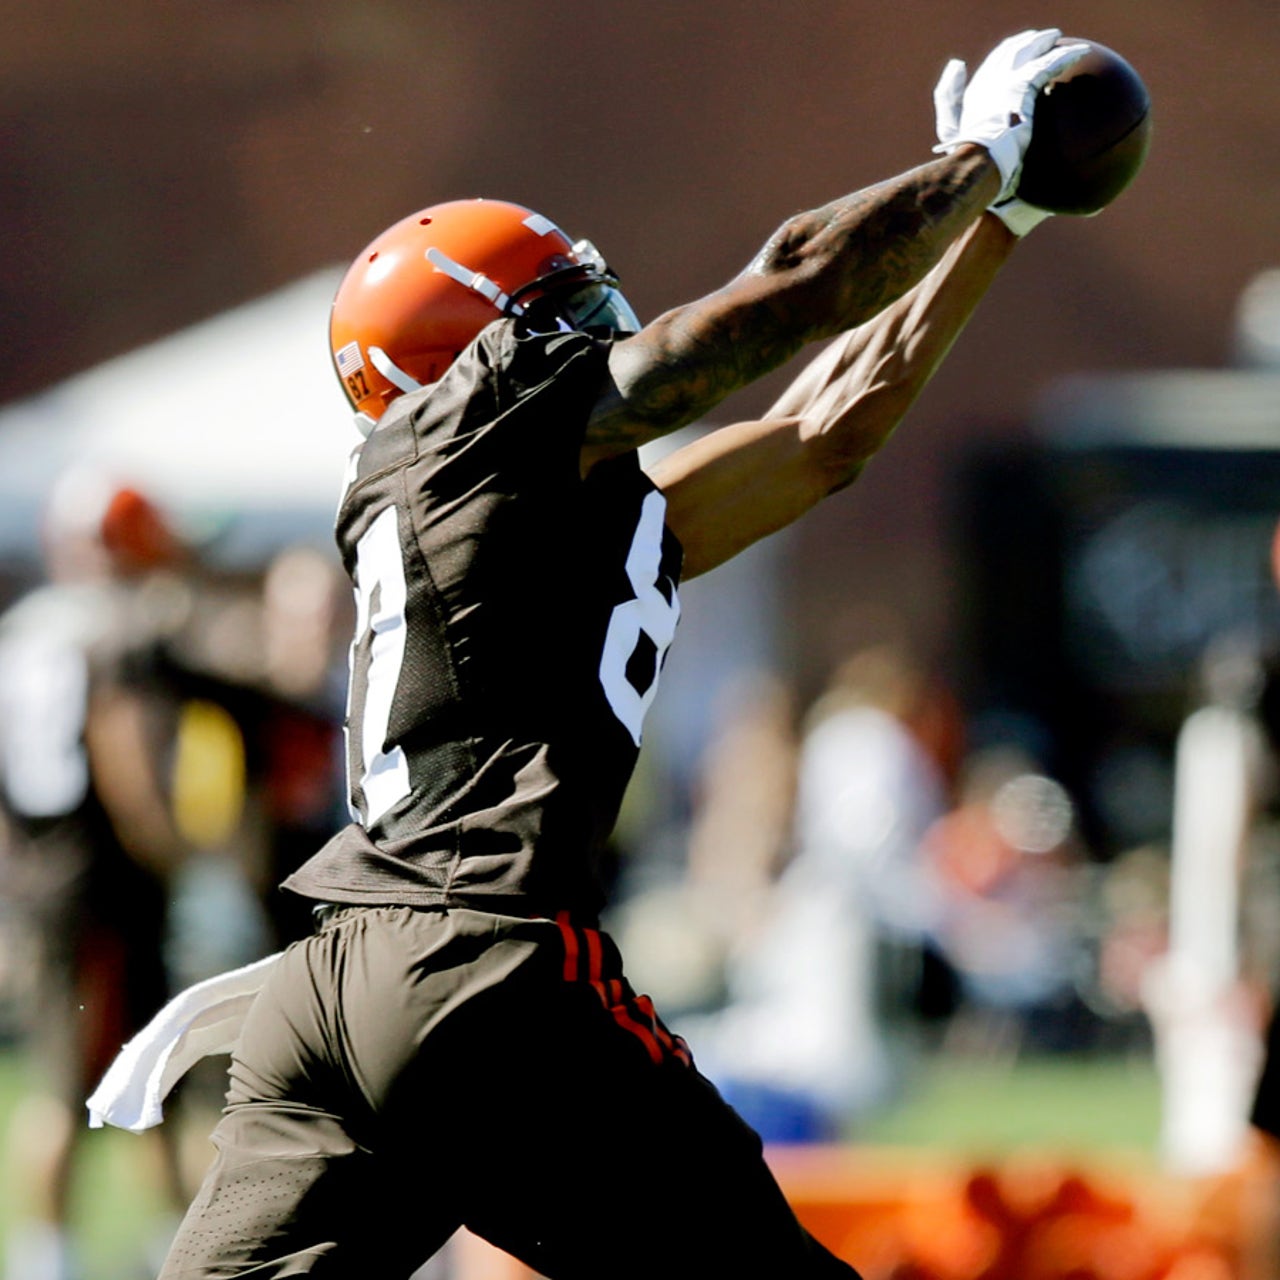 The case for Terrelle Pryor making the Browns roster